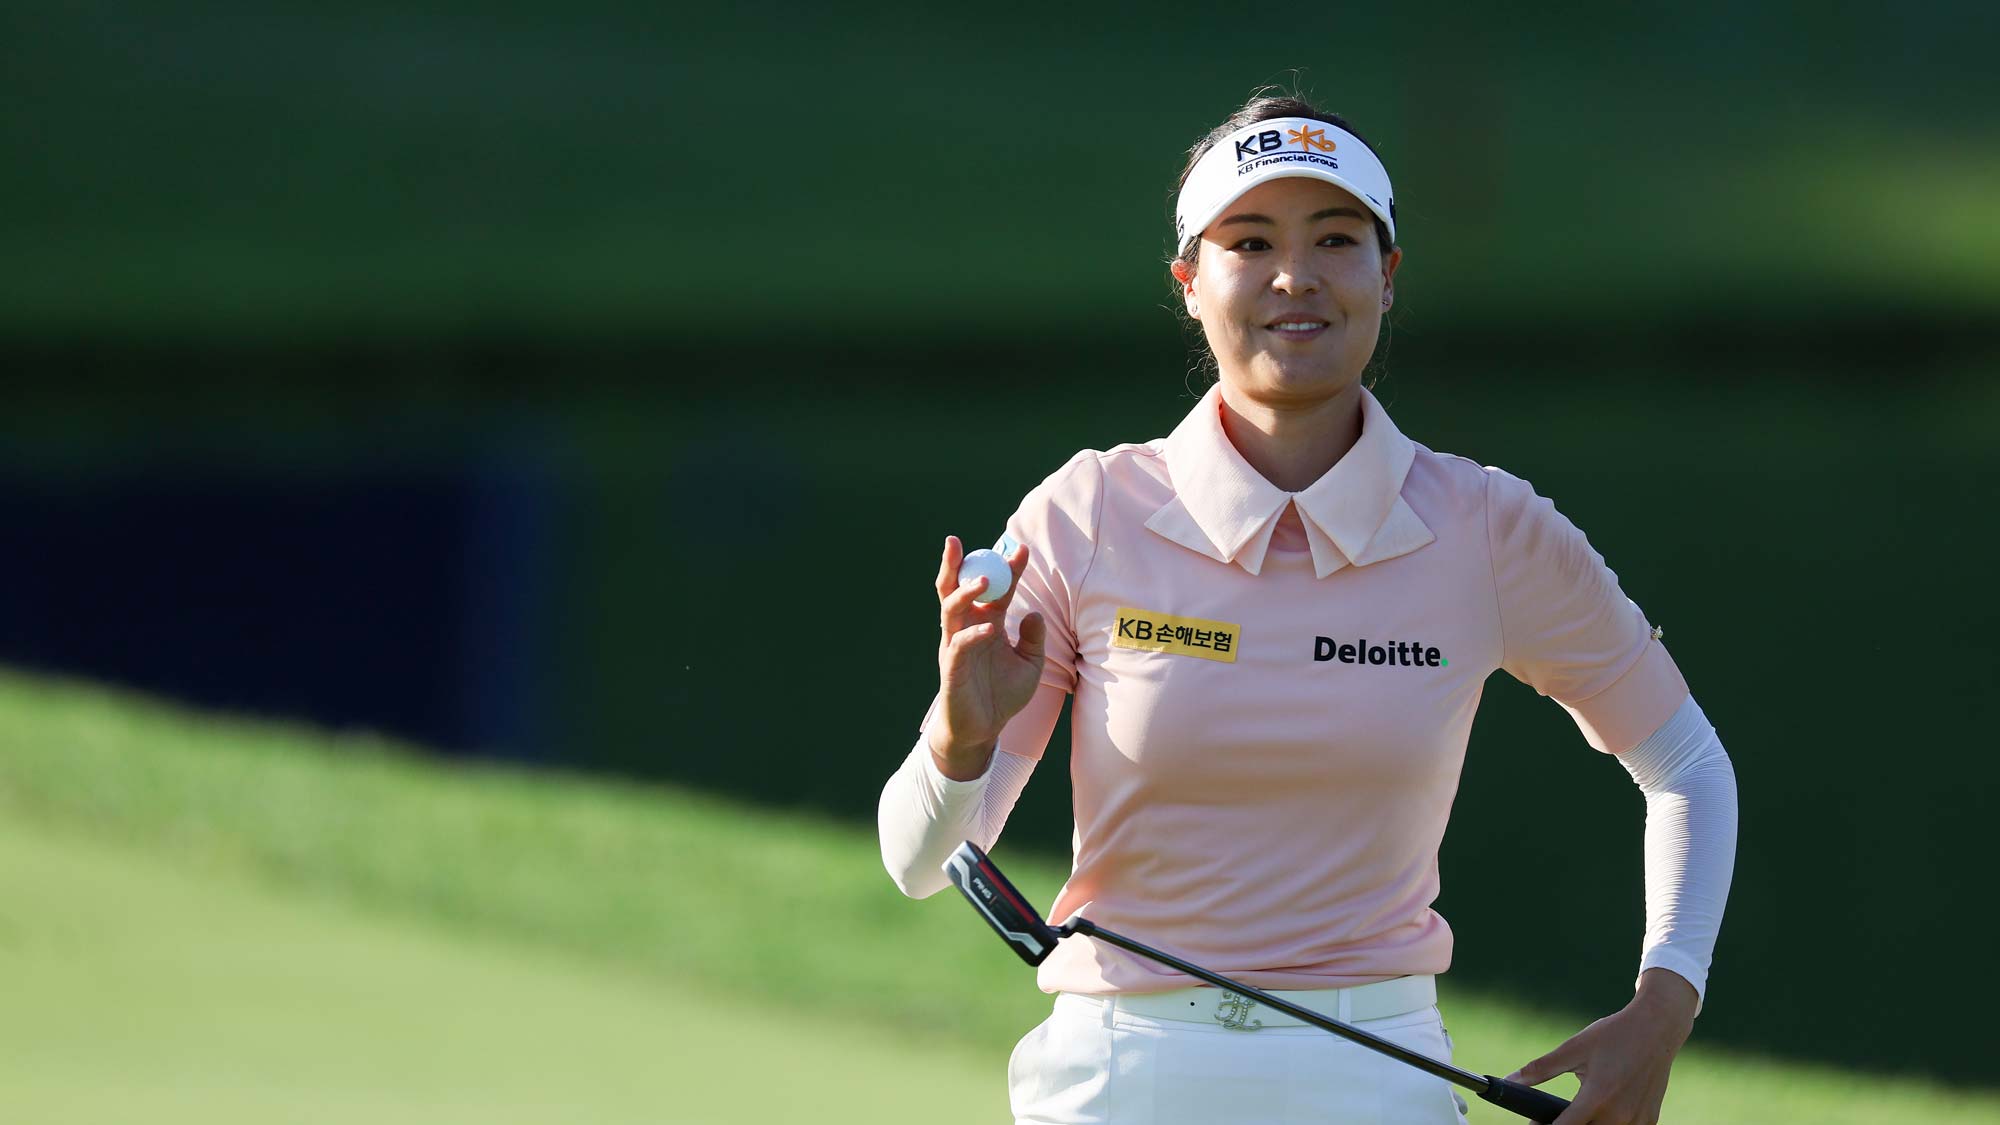 In Gee Chun of South Korea reacts after making birdie on the 18th green during the second round of the KPMG Women's PGA Championship at Congressional Country Club